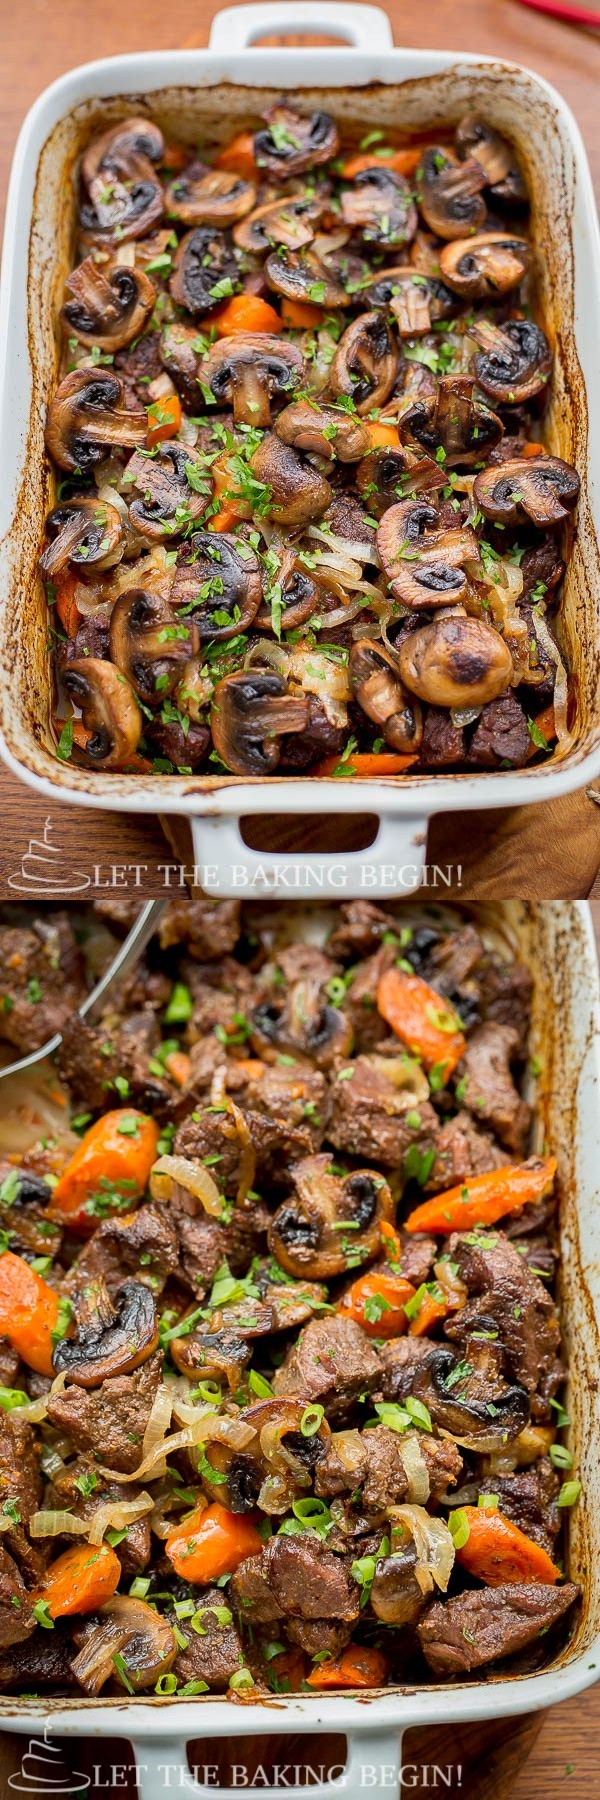 Beef with Caramelized Onions and Mushrooms